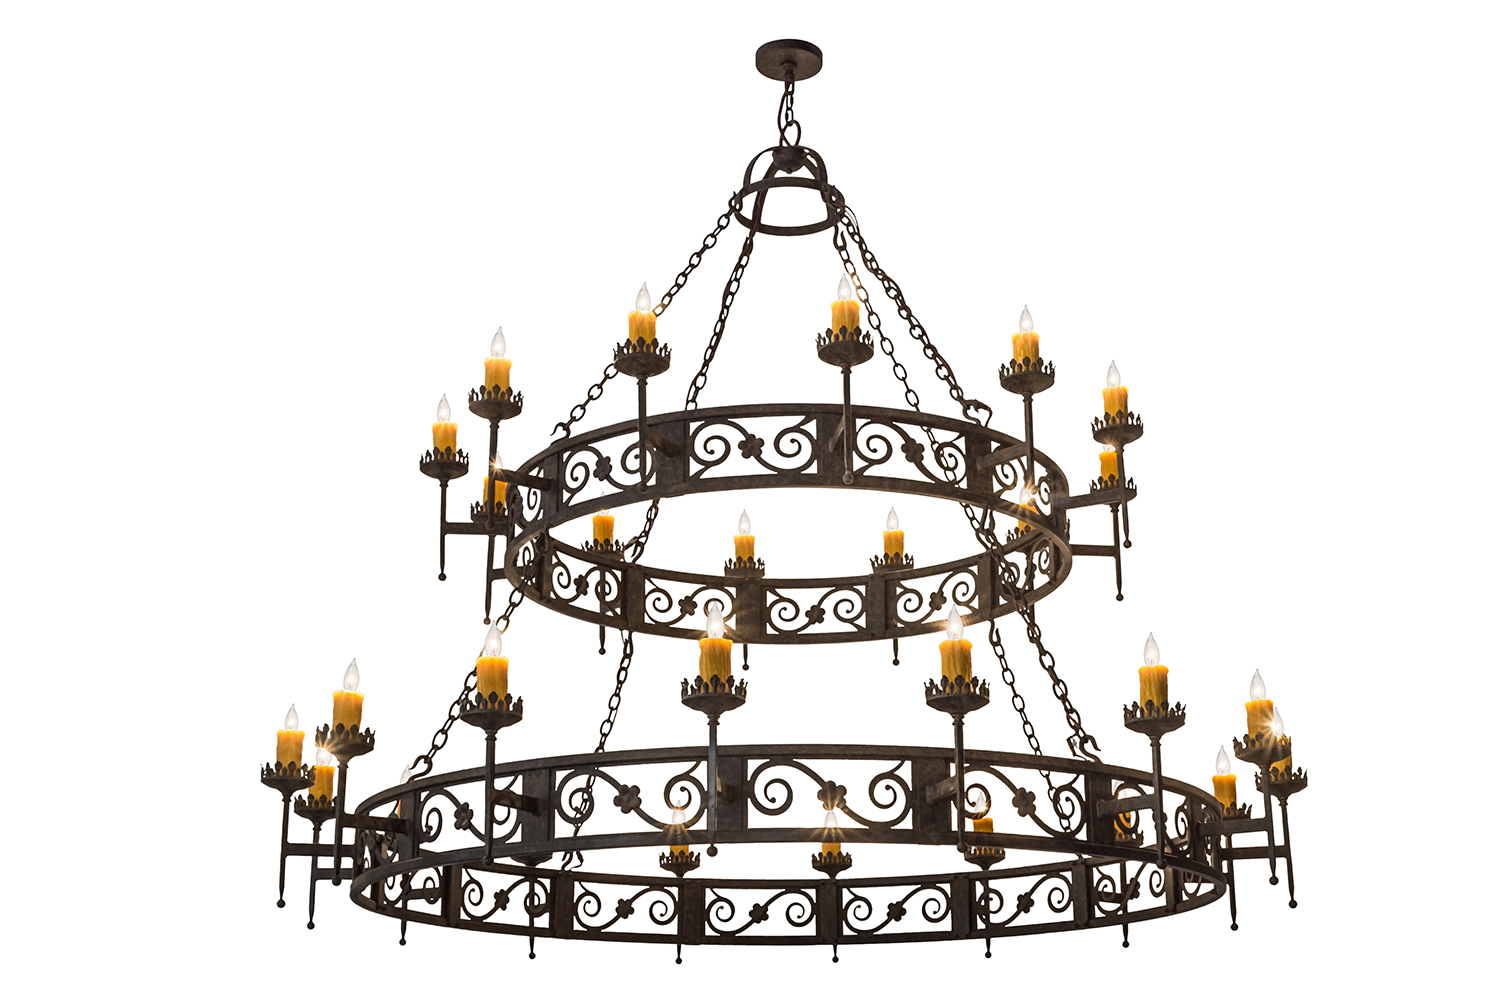 The chandelier has elaborate scroll accents with floral medallions and decorative bobeches which embrace 28 amber faux candl